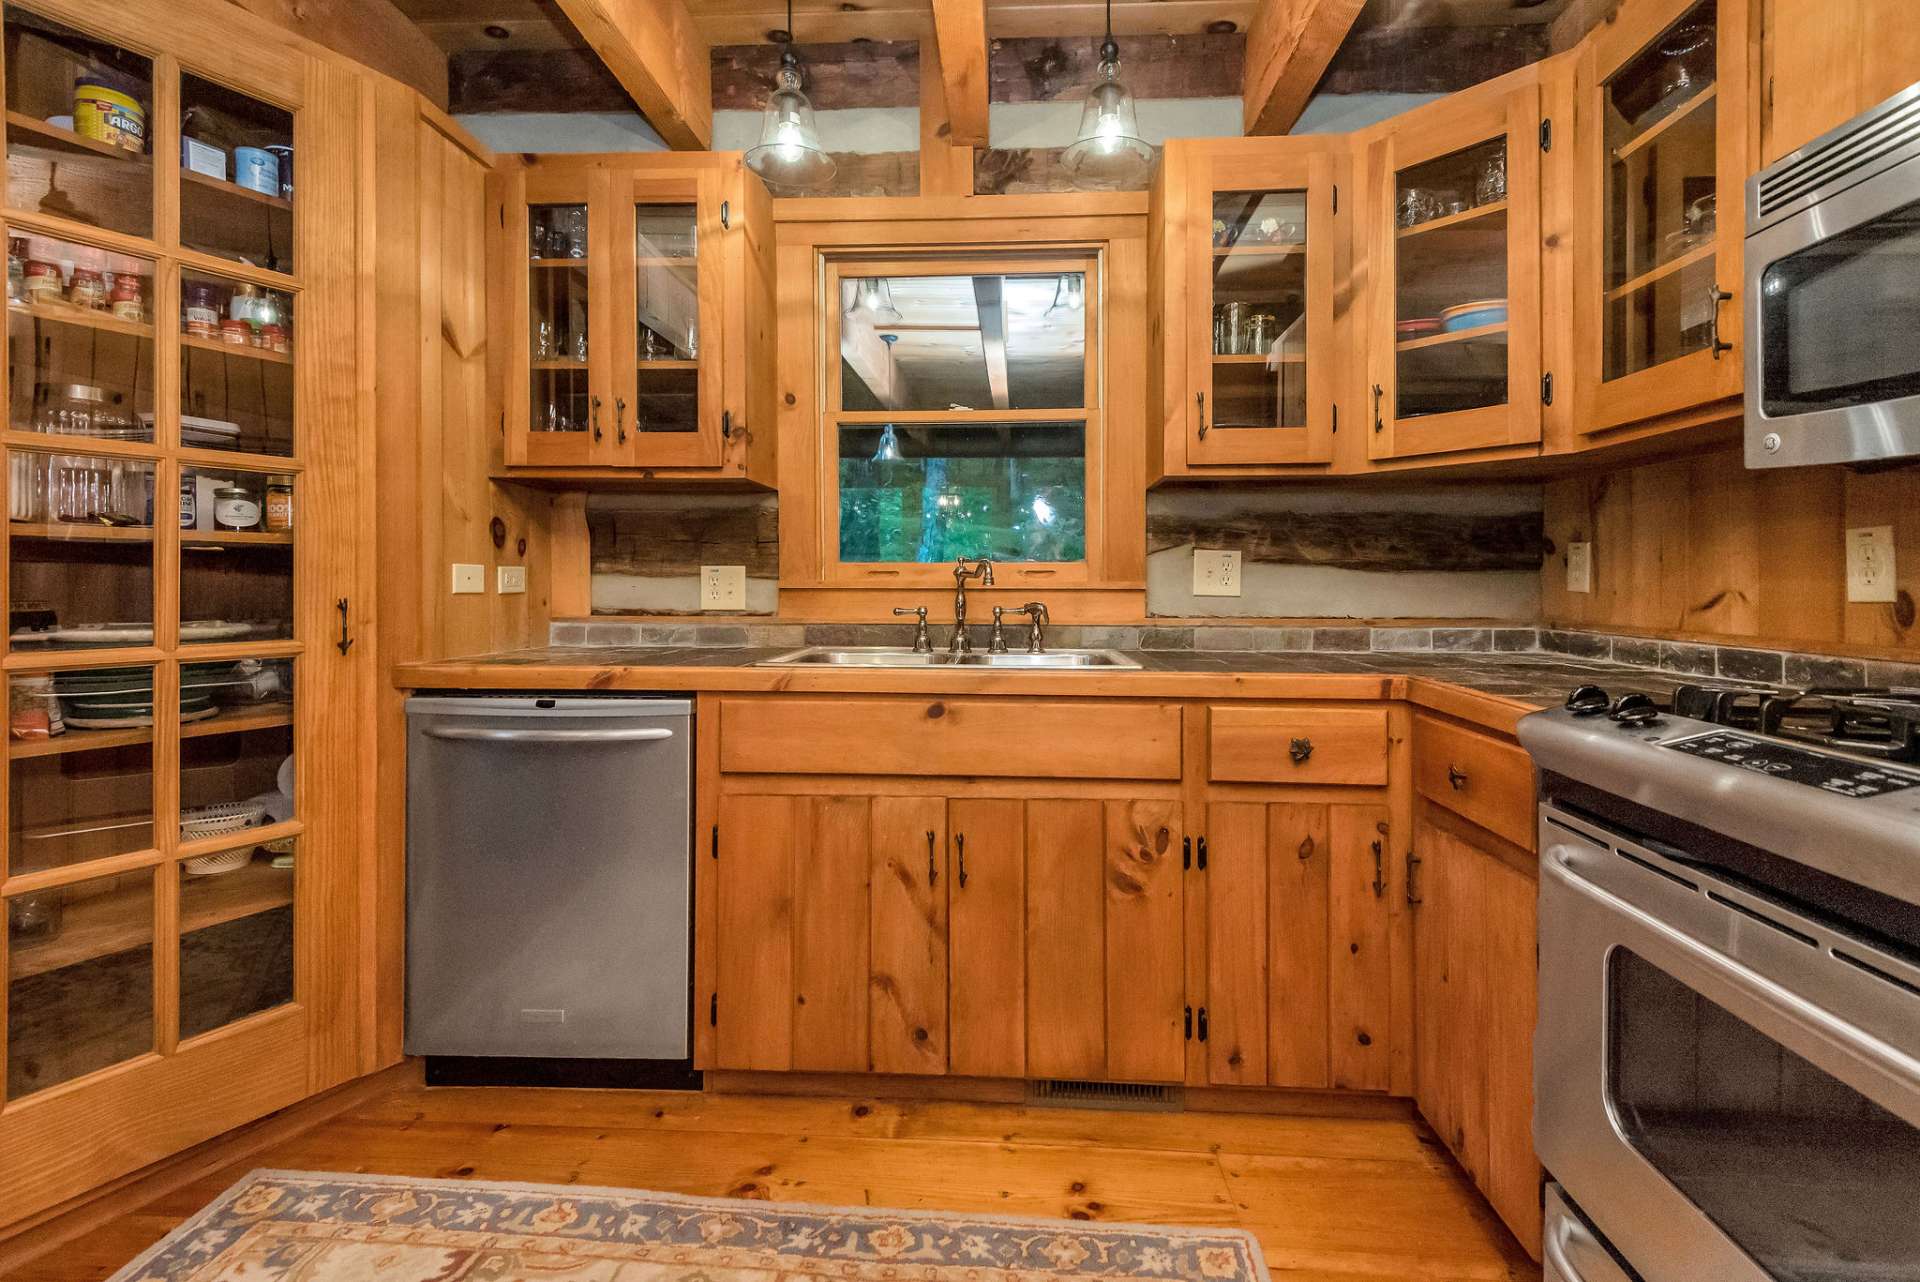 The convenient glass door pantry adds to the modern rustic charm of this cabin.